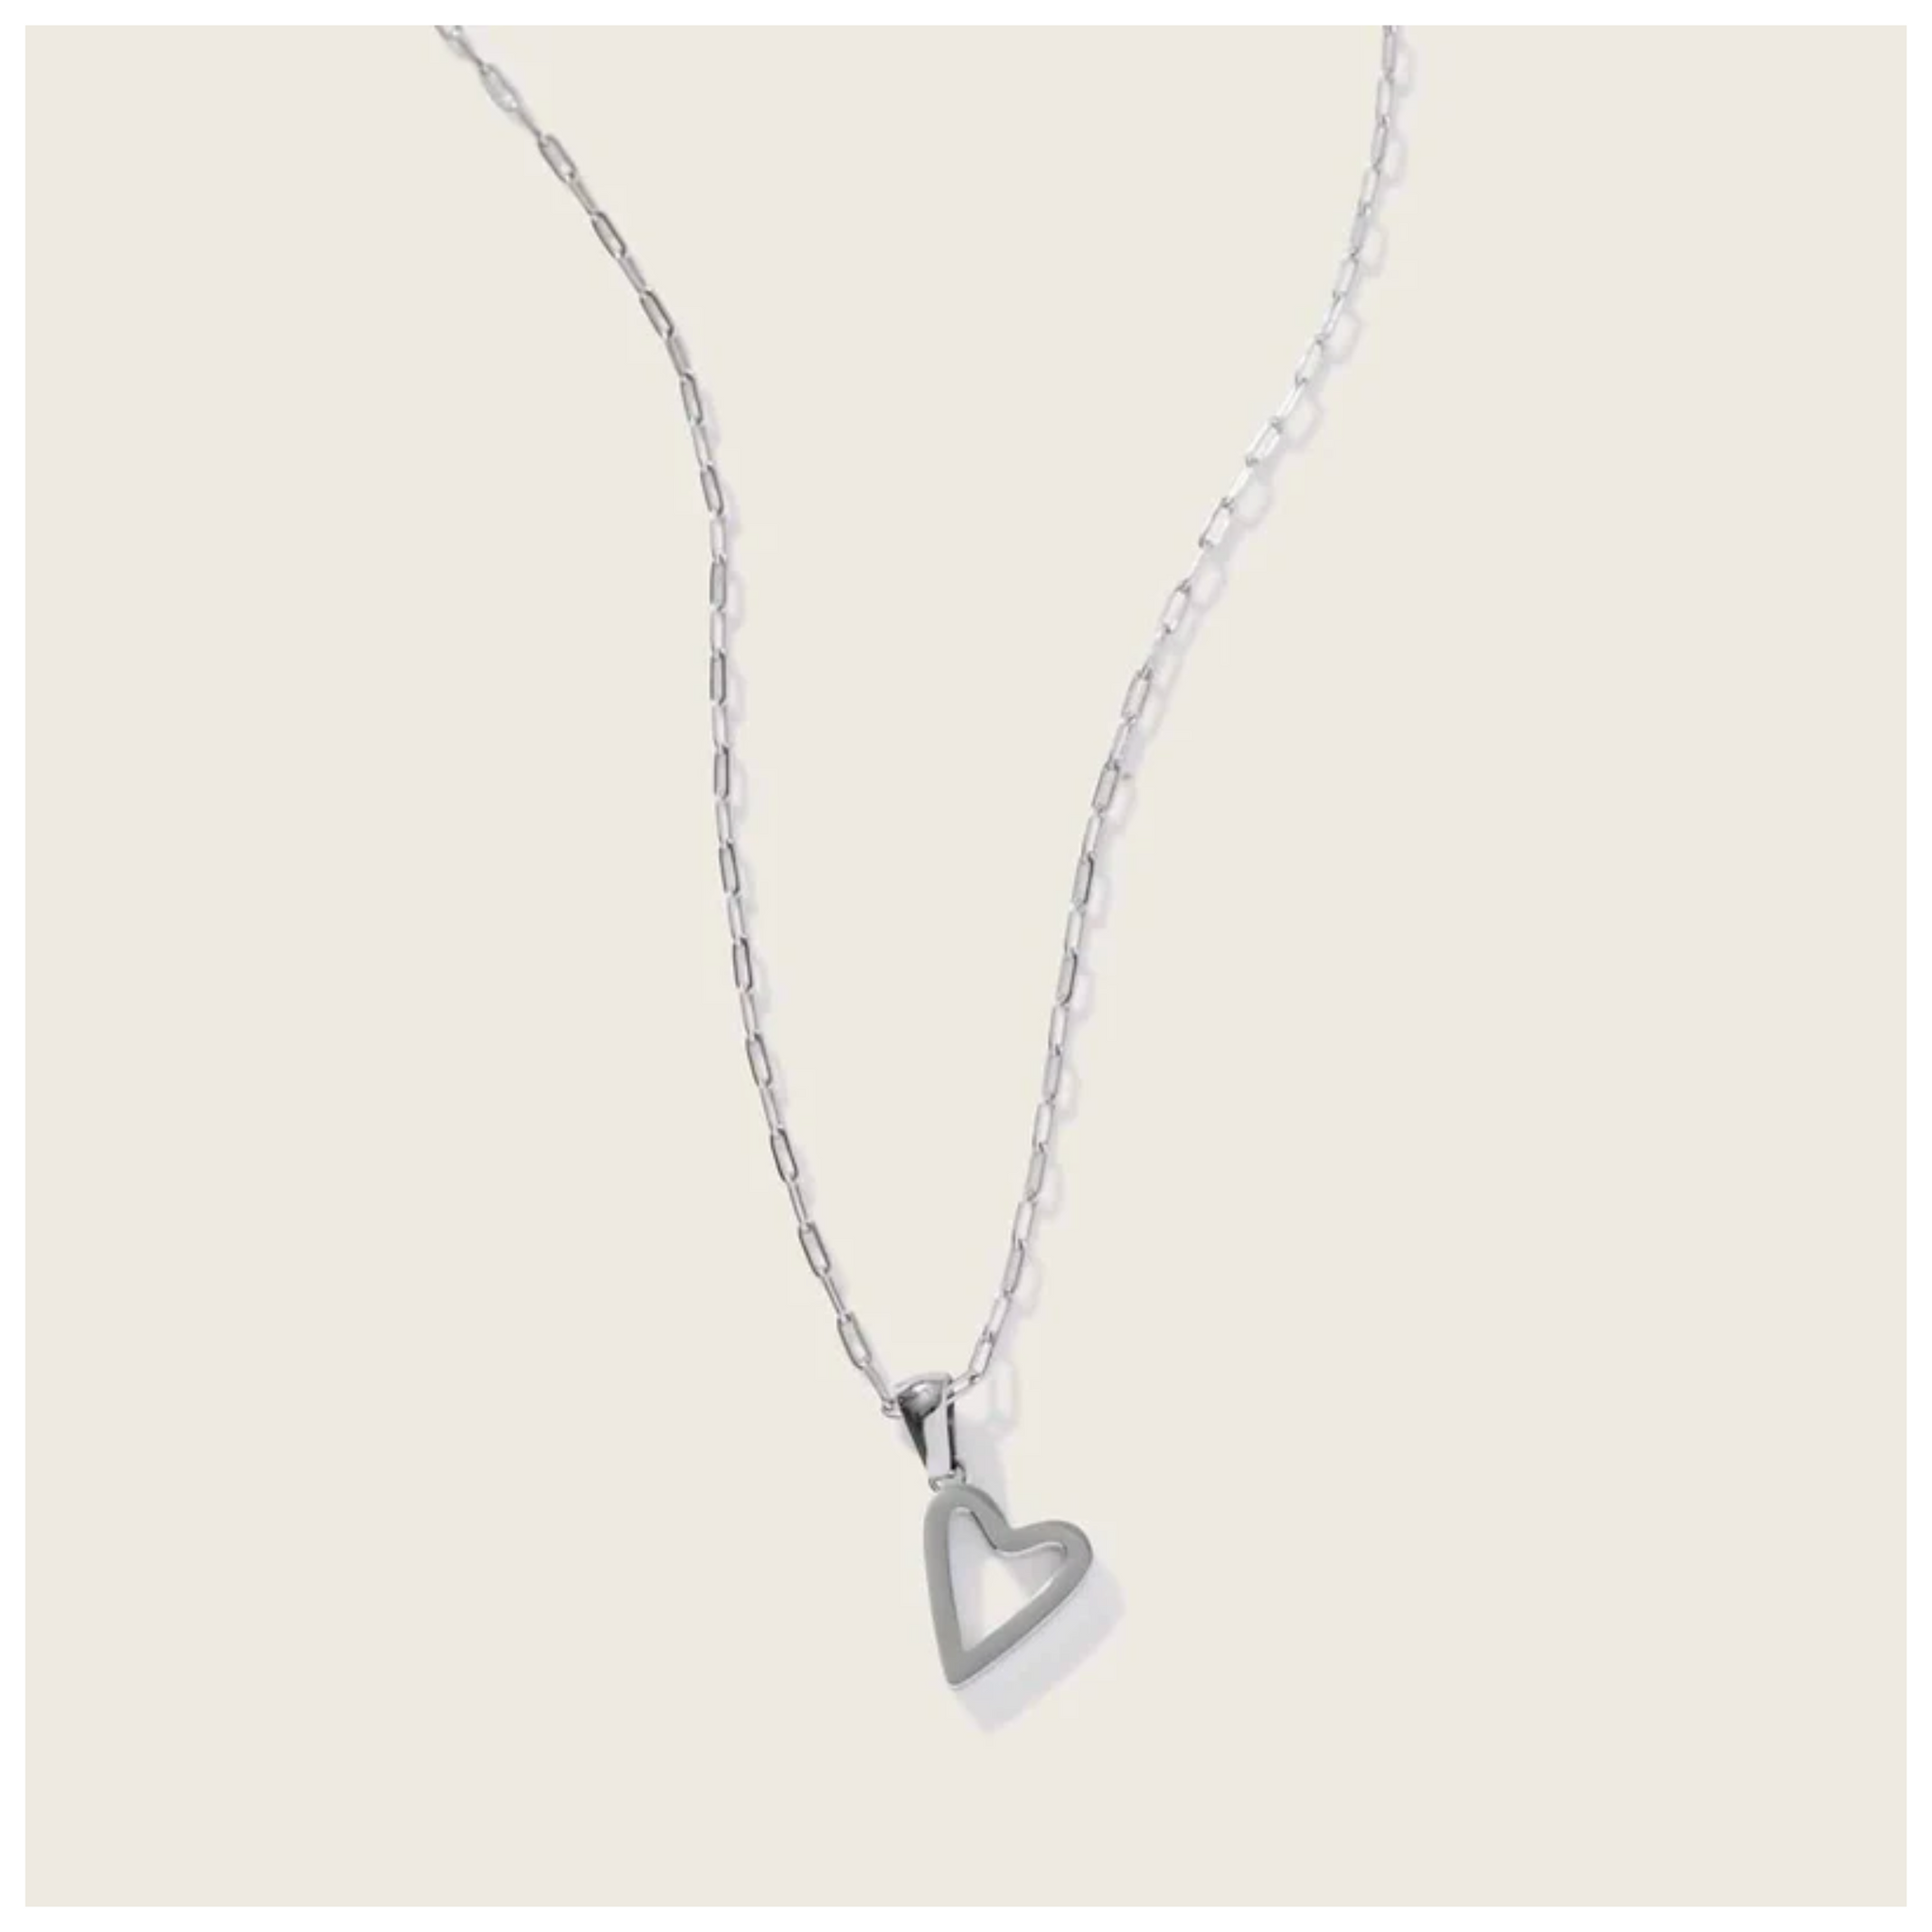 Heavenly Heart Necklace in Stainless